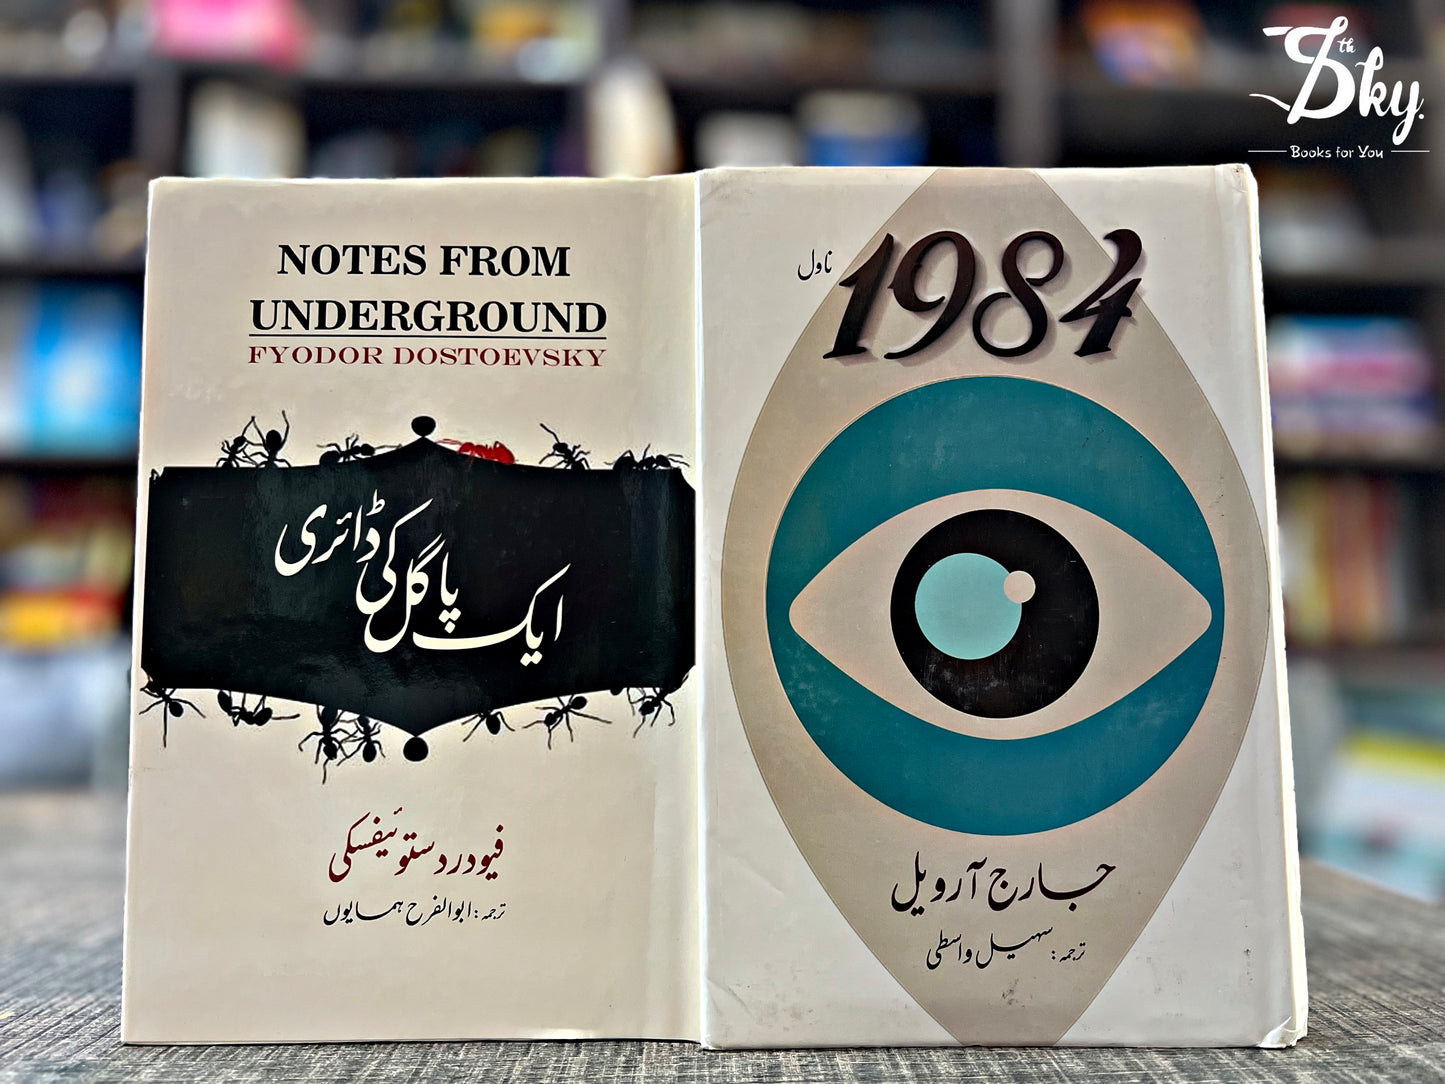 Set of 1984 novel and Notes from underground (in urdu)